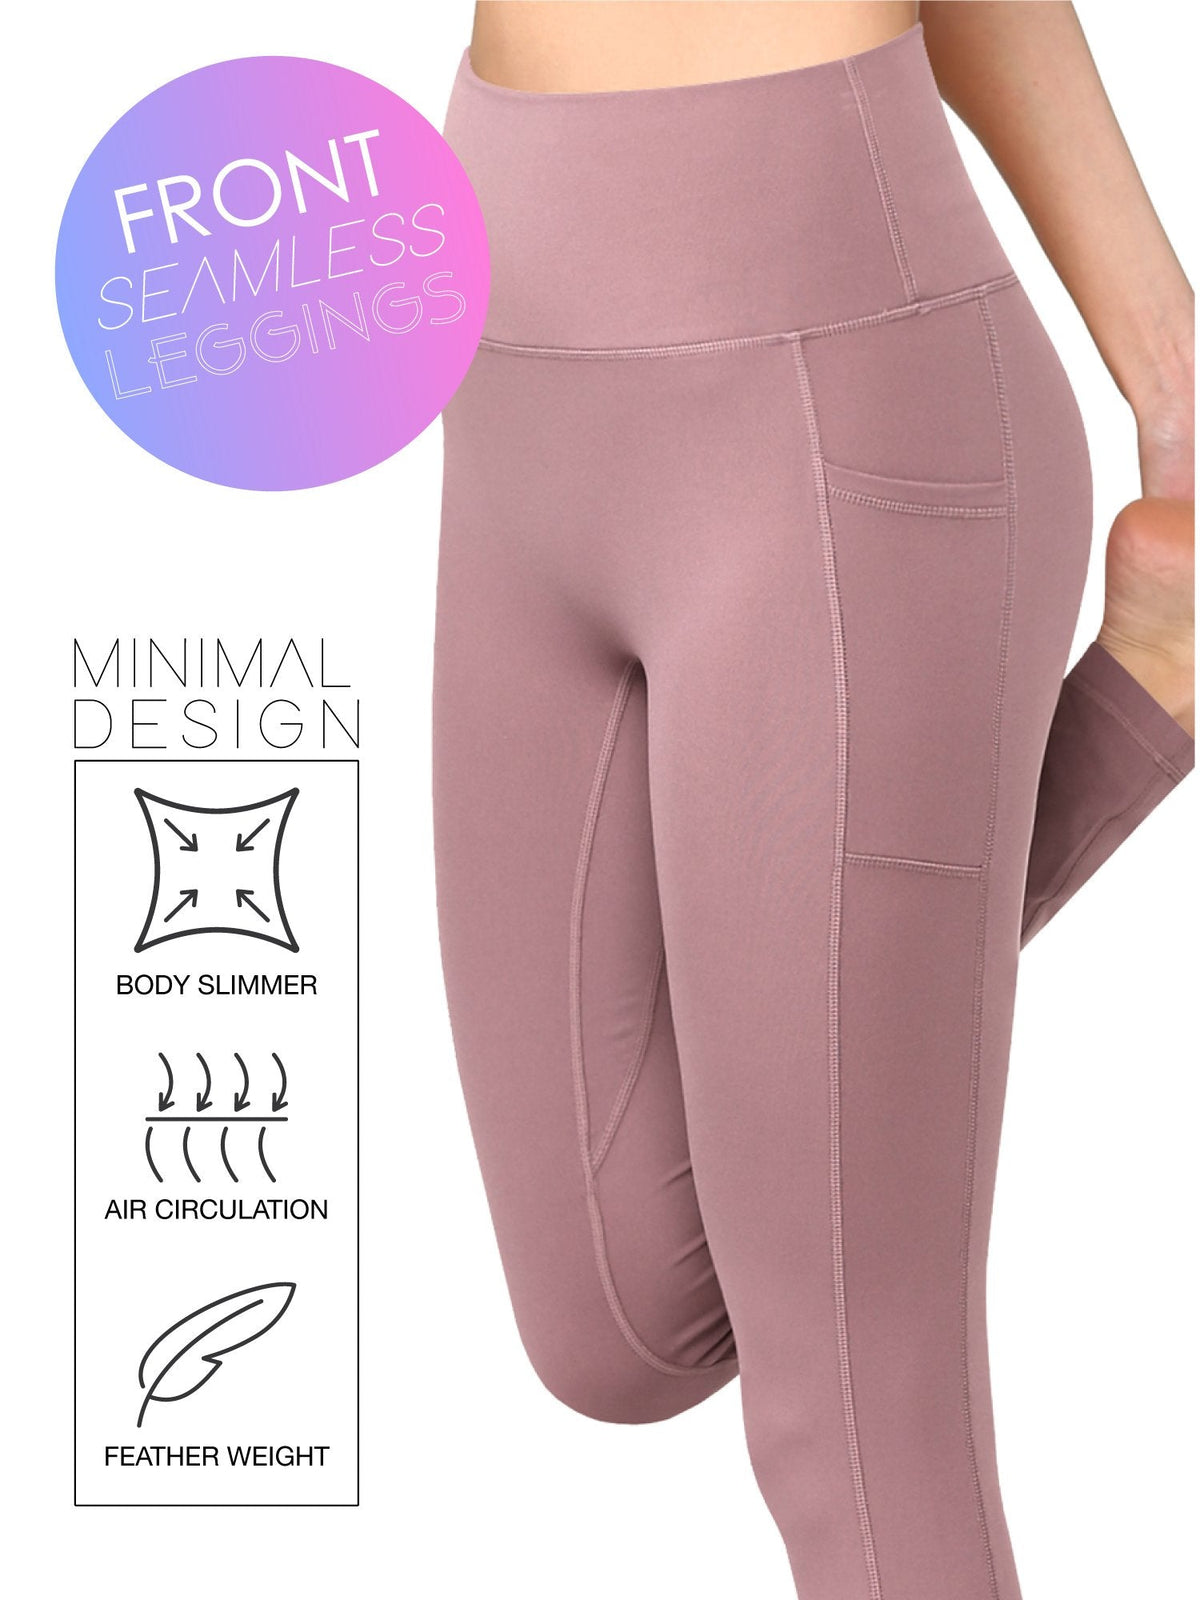 Every Day Wear Leggings with Side Pockets Yoga Pants